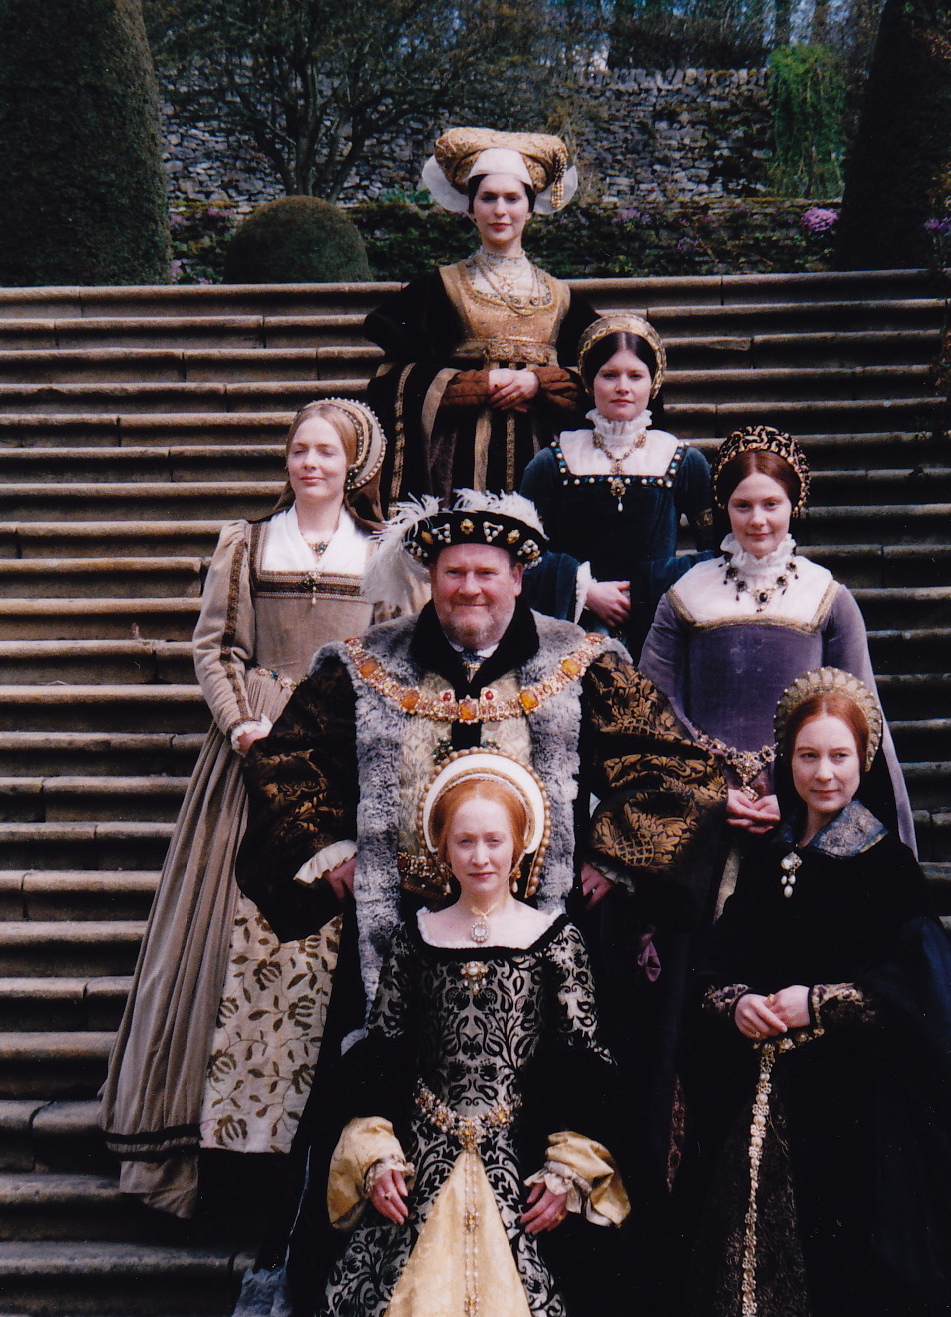 Catherine Siggins, with Andy Rashleigh (Henry VIII), Michelle Abrahams (Catherine Howard), Caroline Lintott (Catherine Parr), and Ladies in Waiting at Haddon Hall.